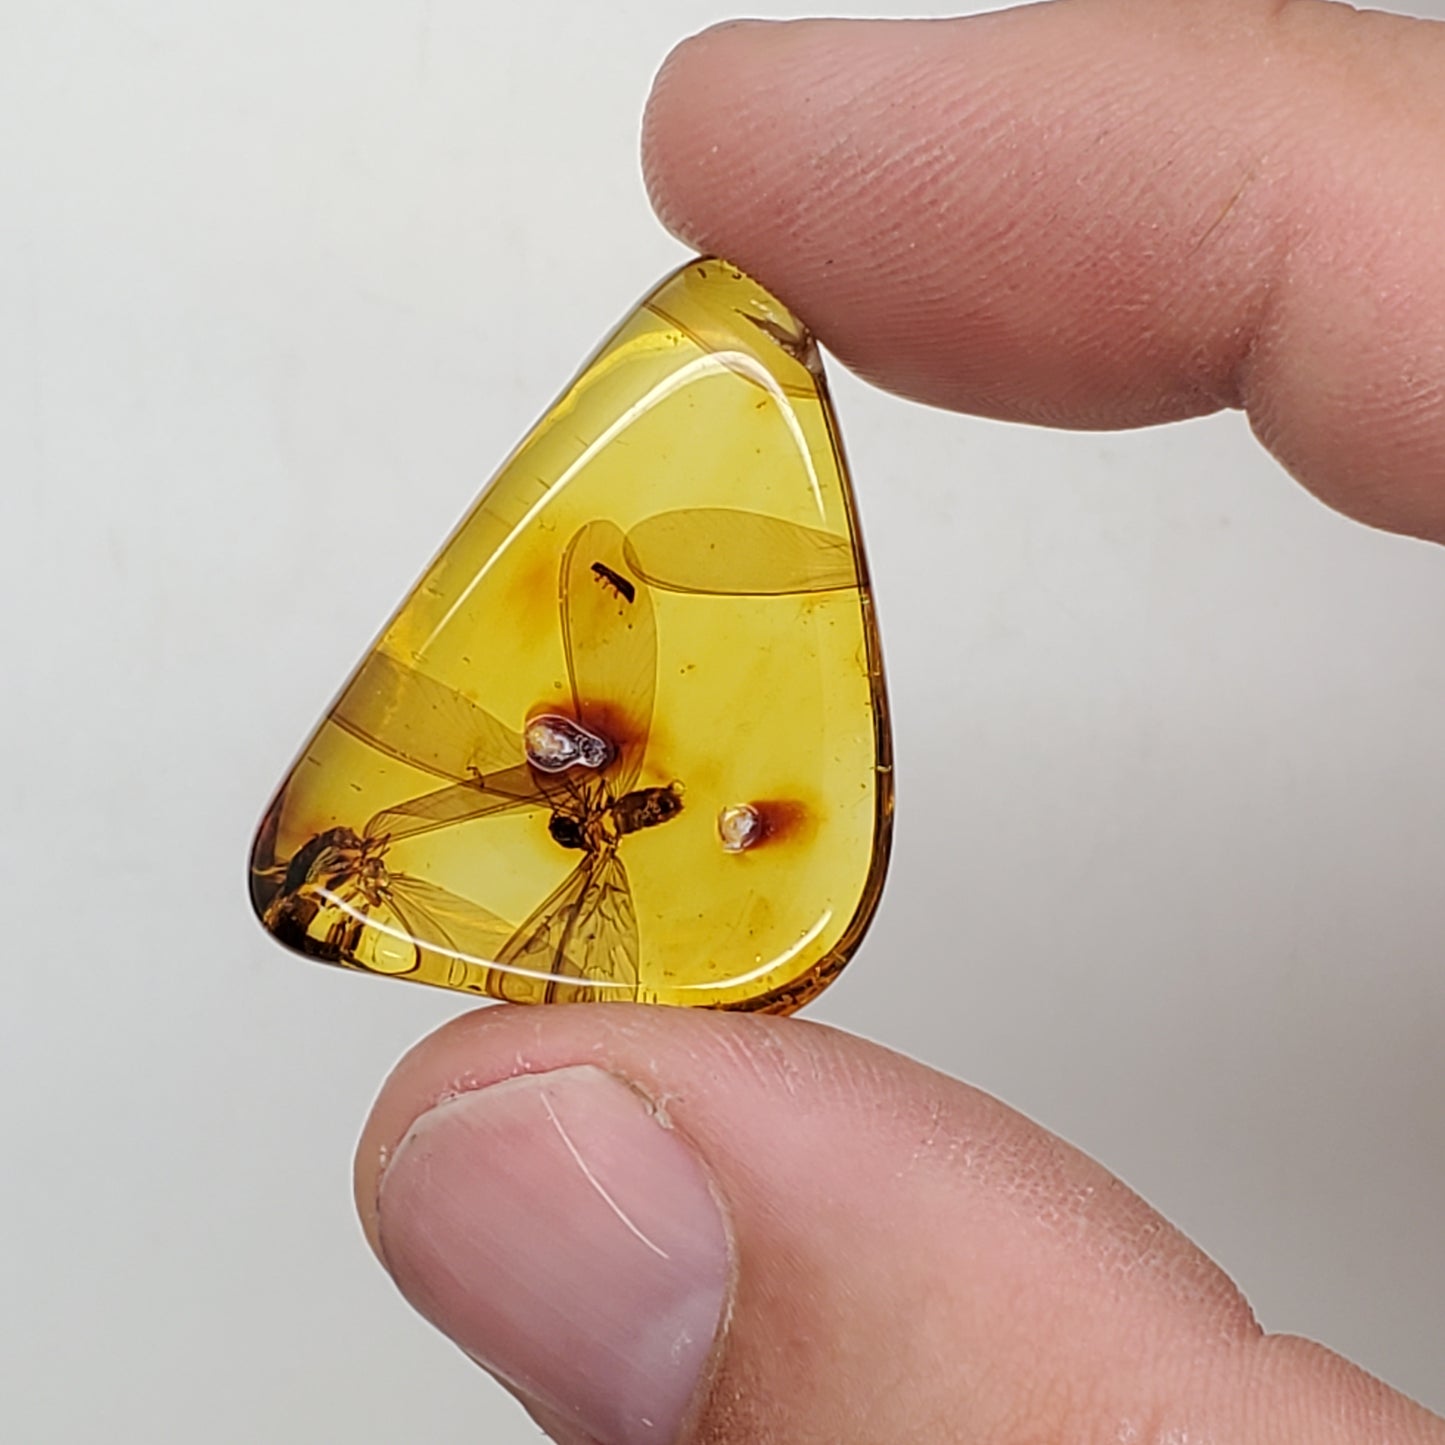 Colombian Amber with 2+ Insects and Inclusions